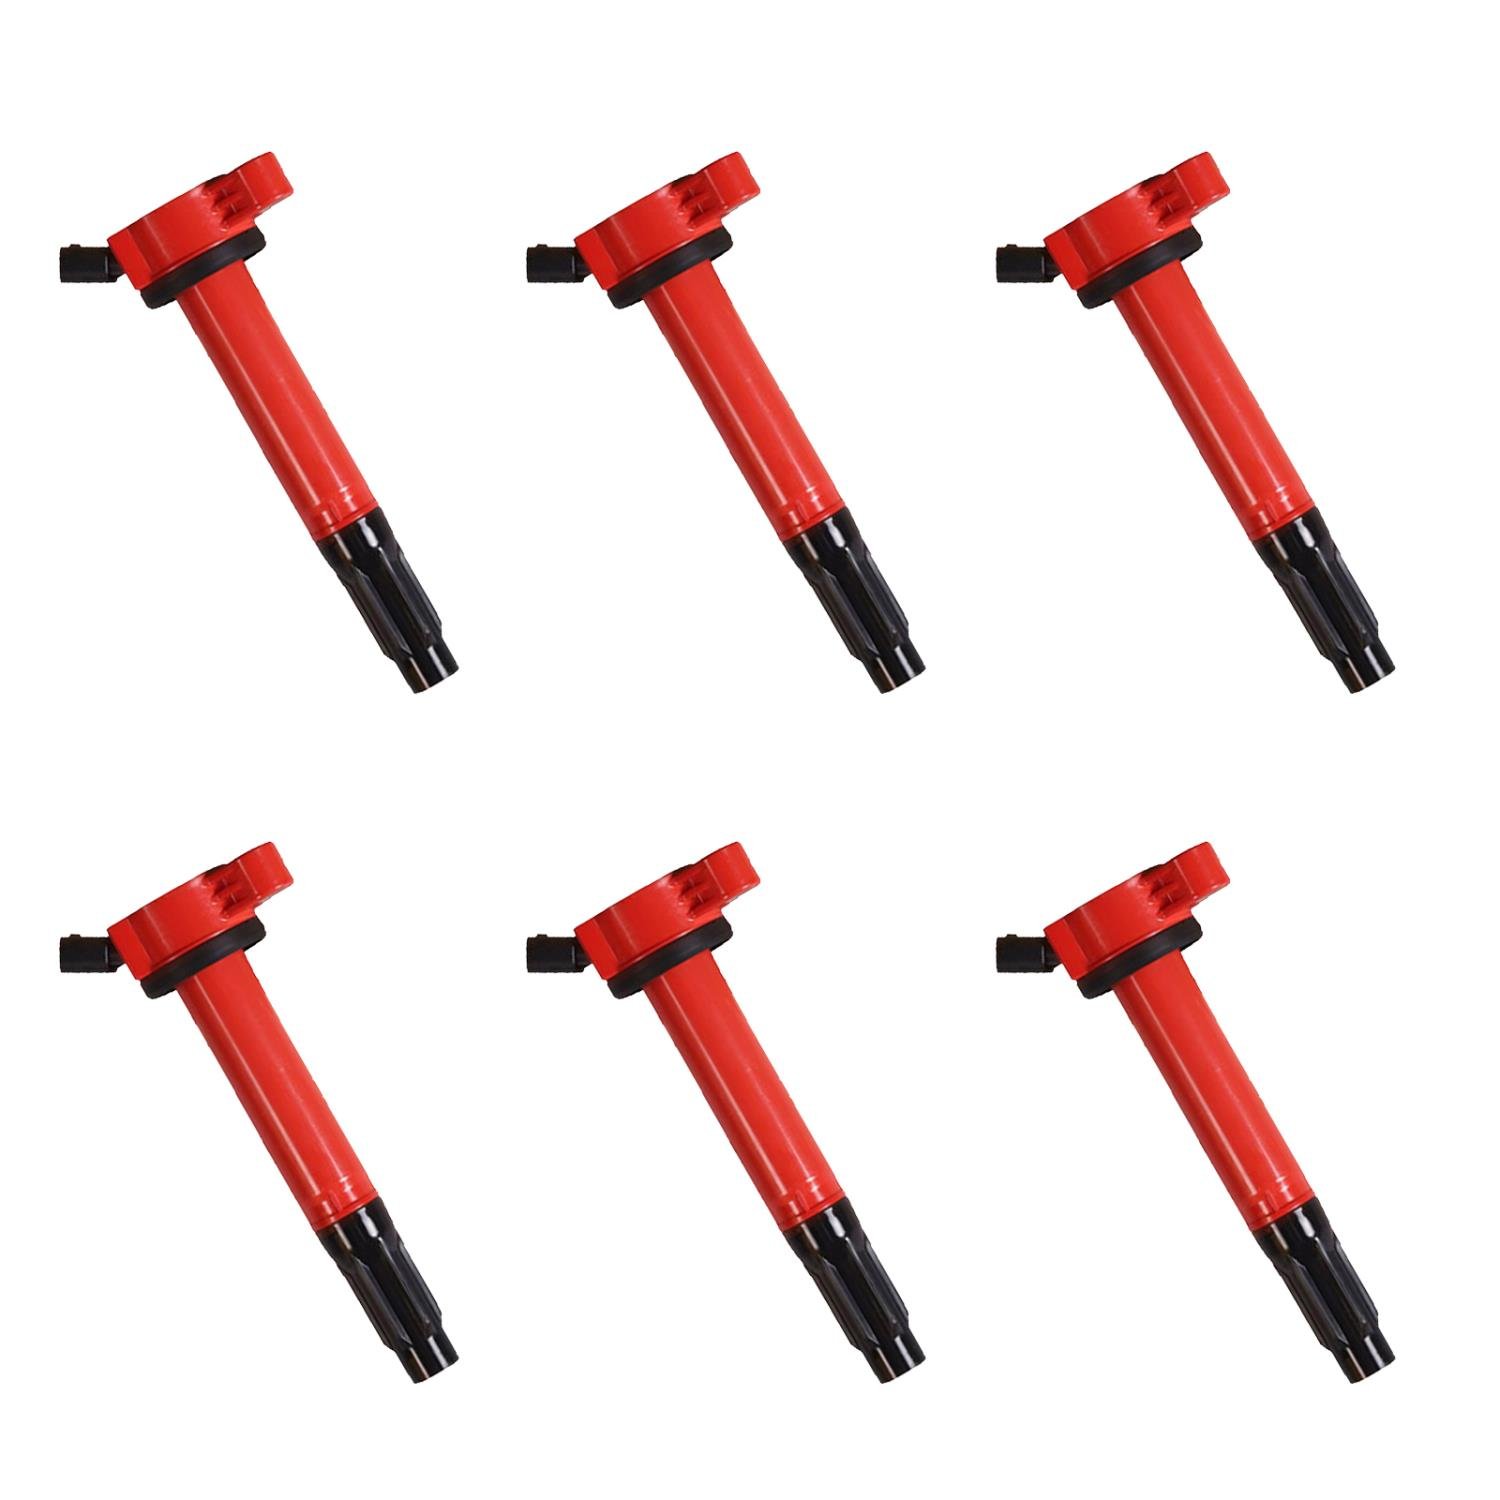 High-Performance Ignition Coils for Toyota Camry/RAV4 [Red]